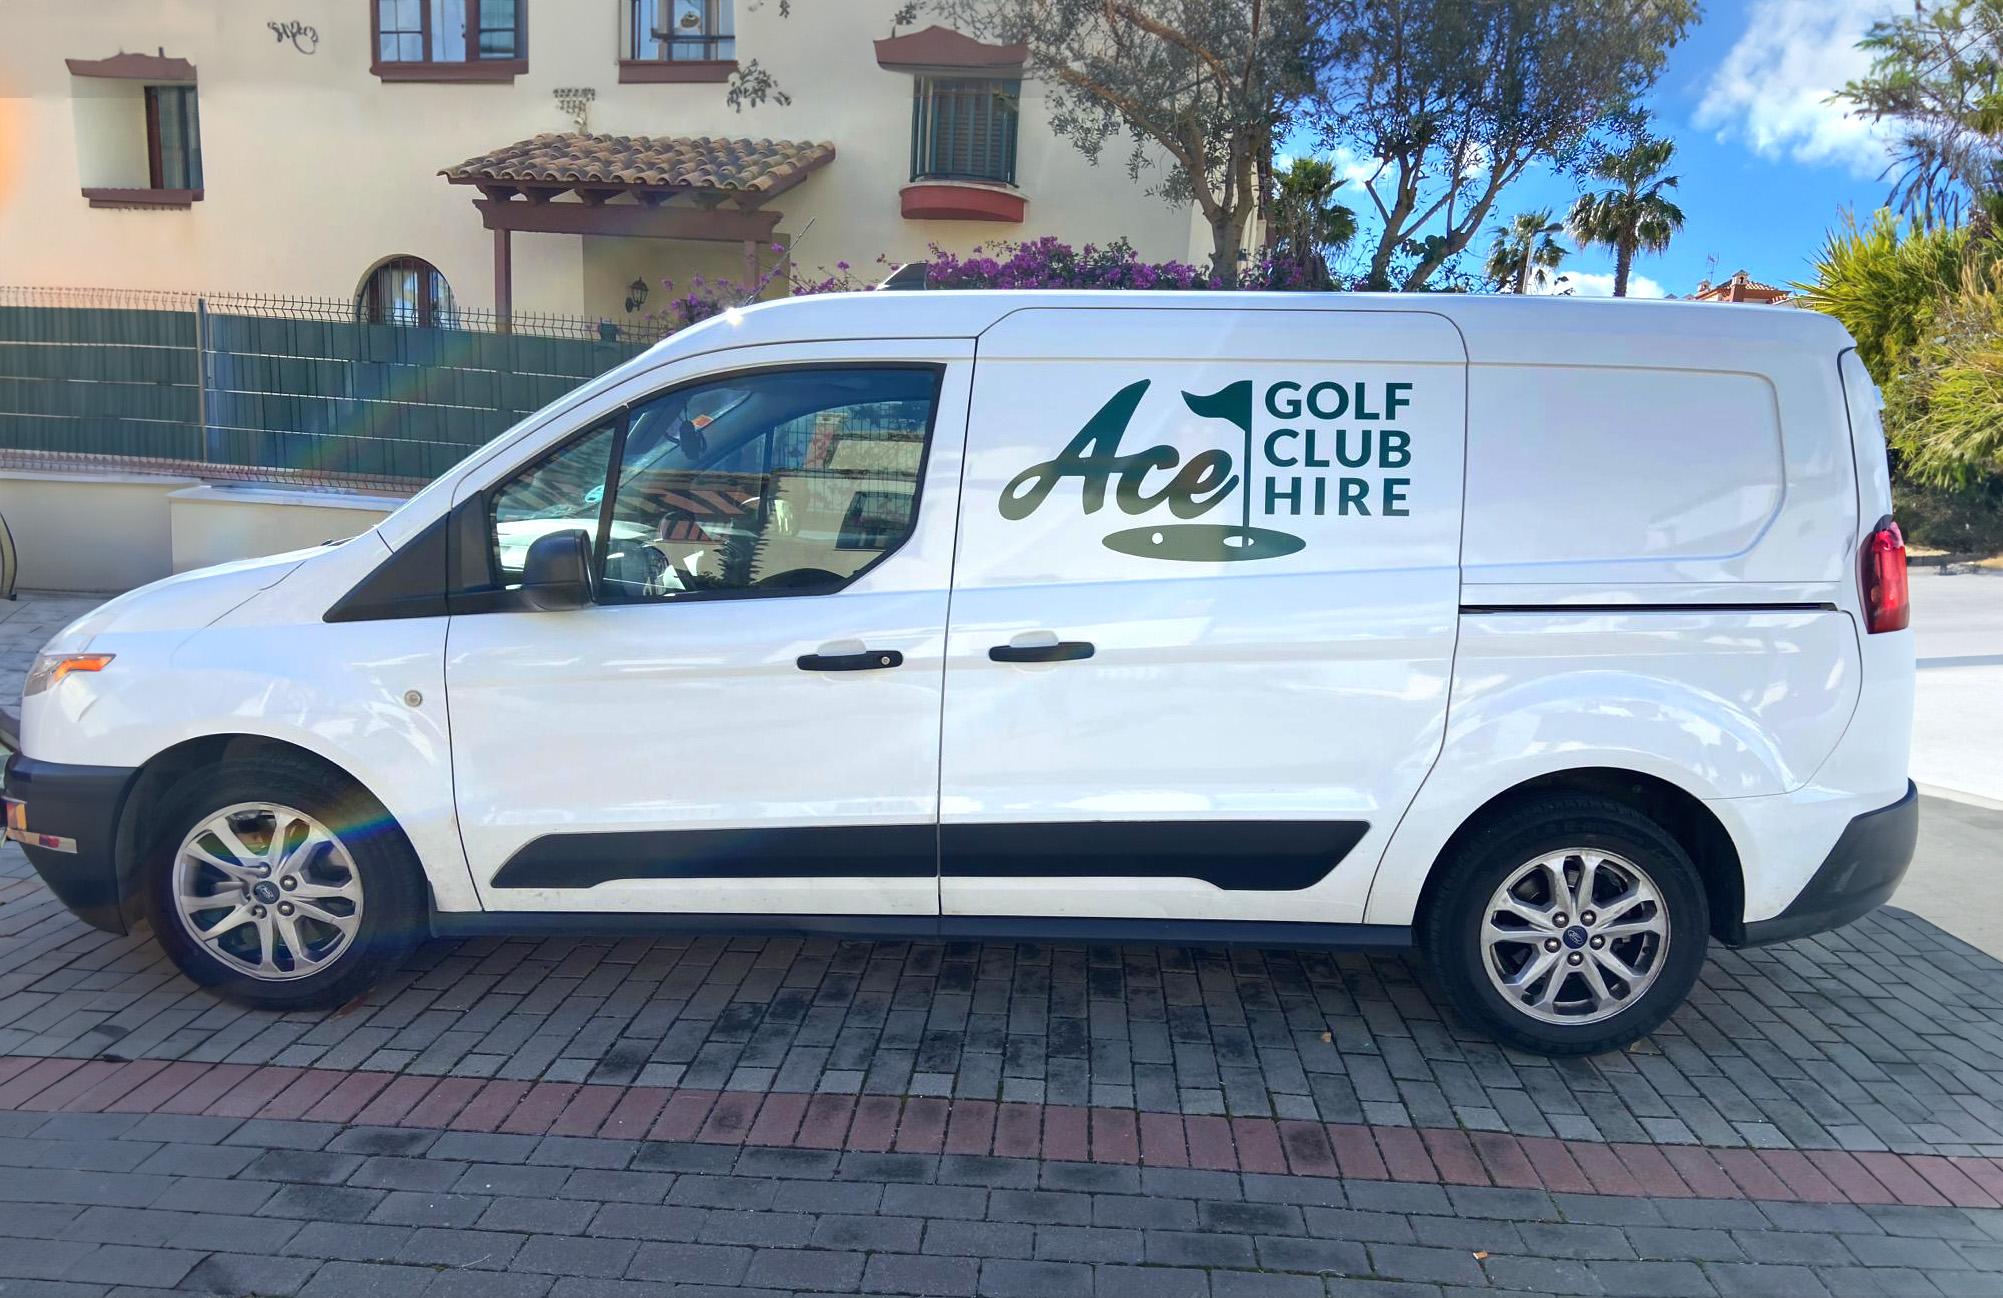 Golf Club Hire van with logo on the side.